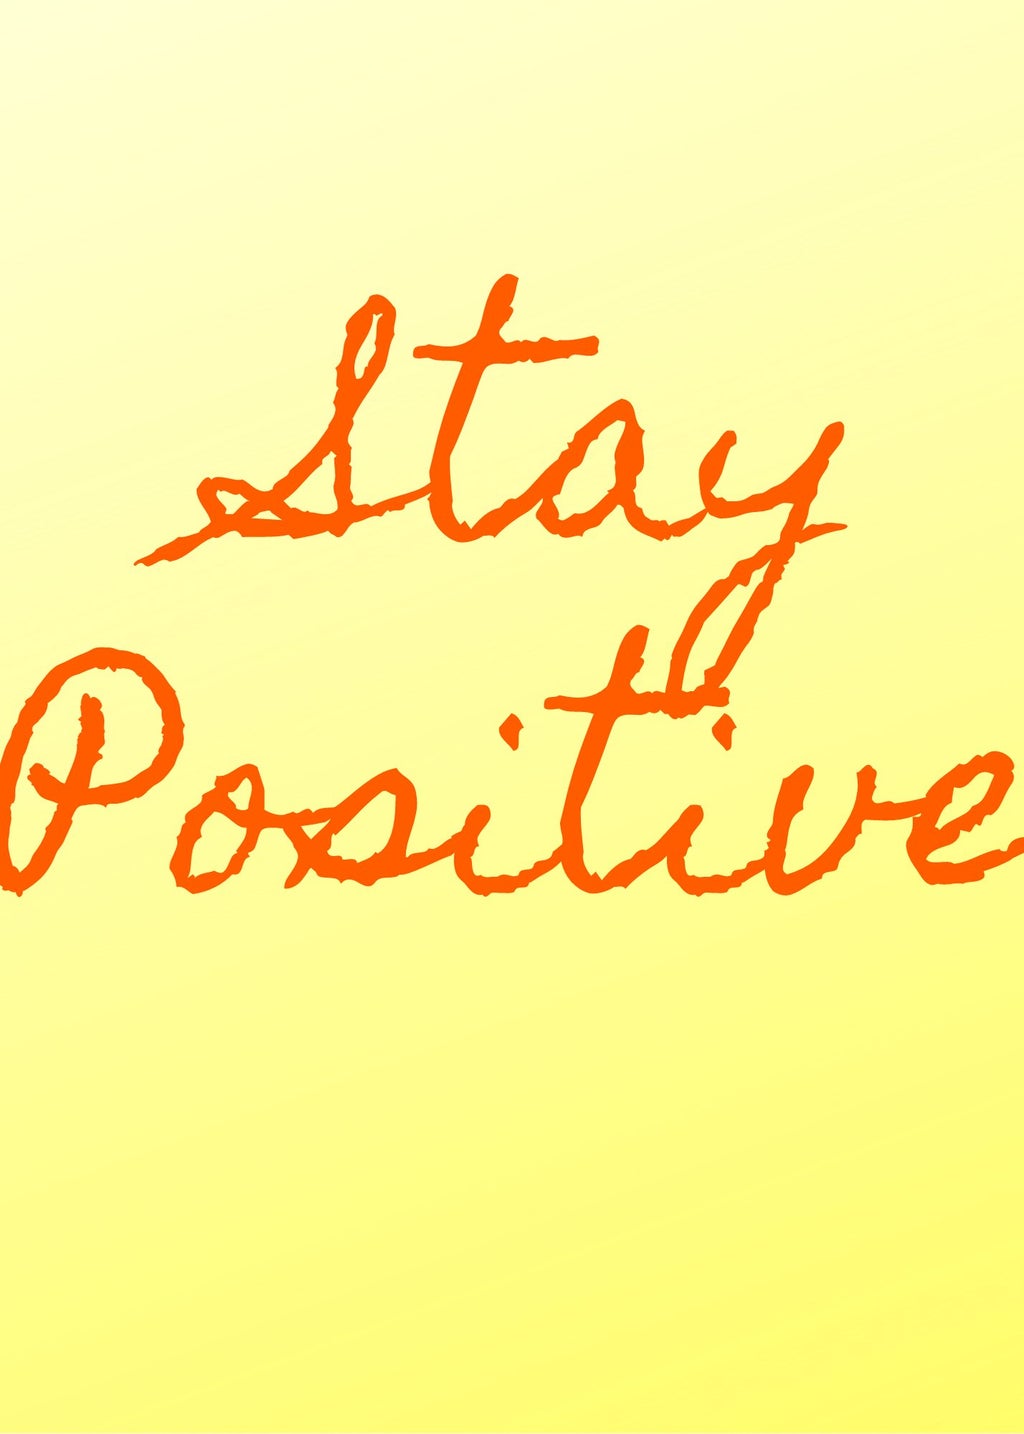 The words \"Stay Positive\", a logo for Sammie (our member\'s) art store